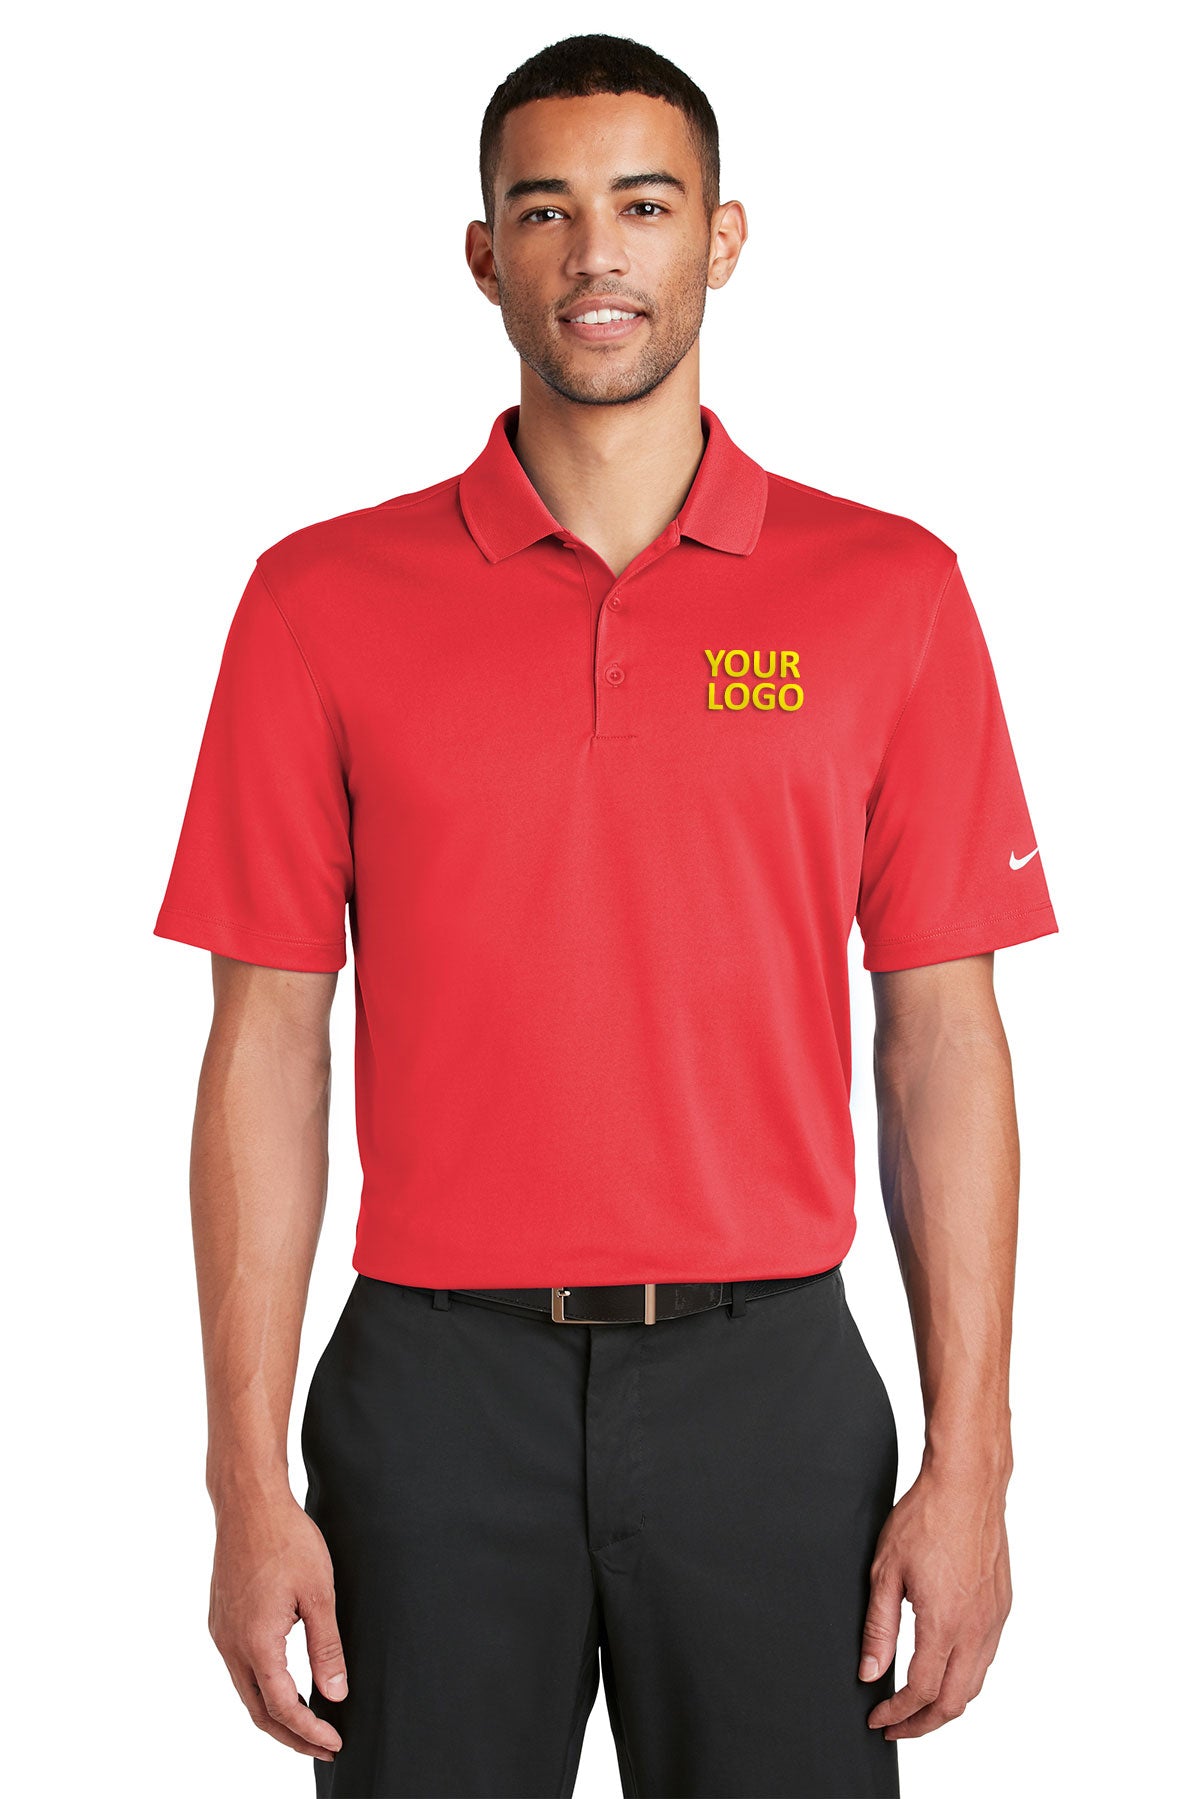 nike university red 838956 business polo shirts embroidered